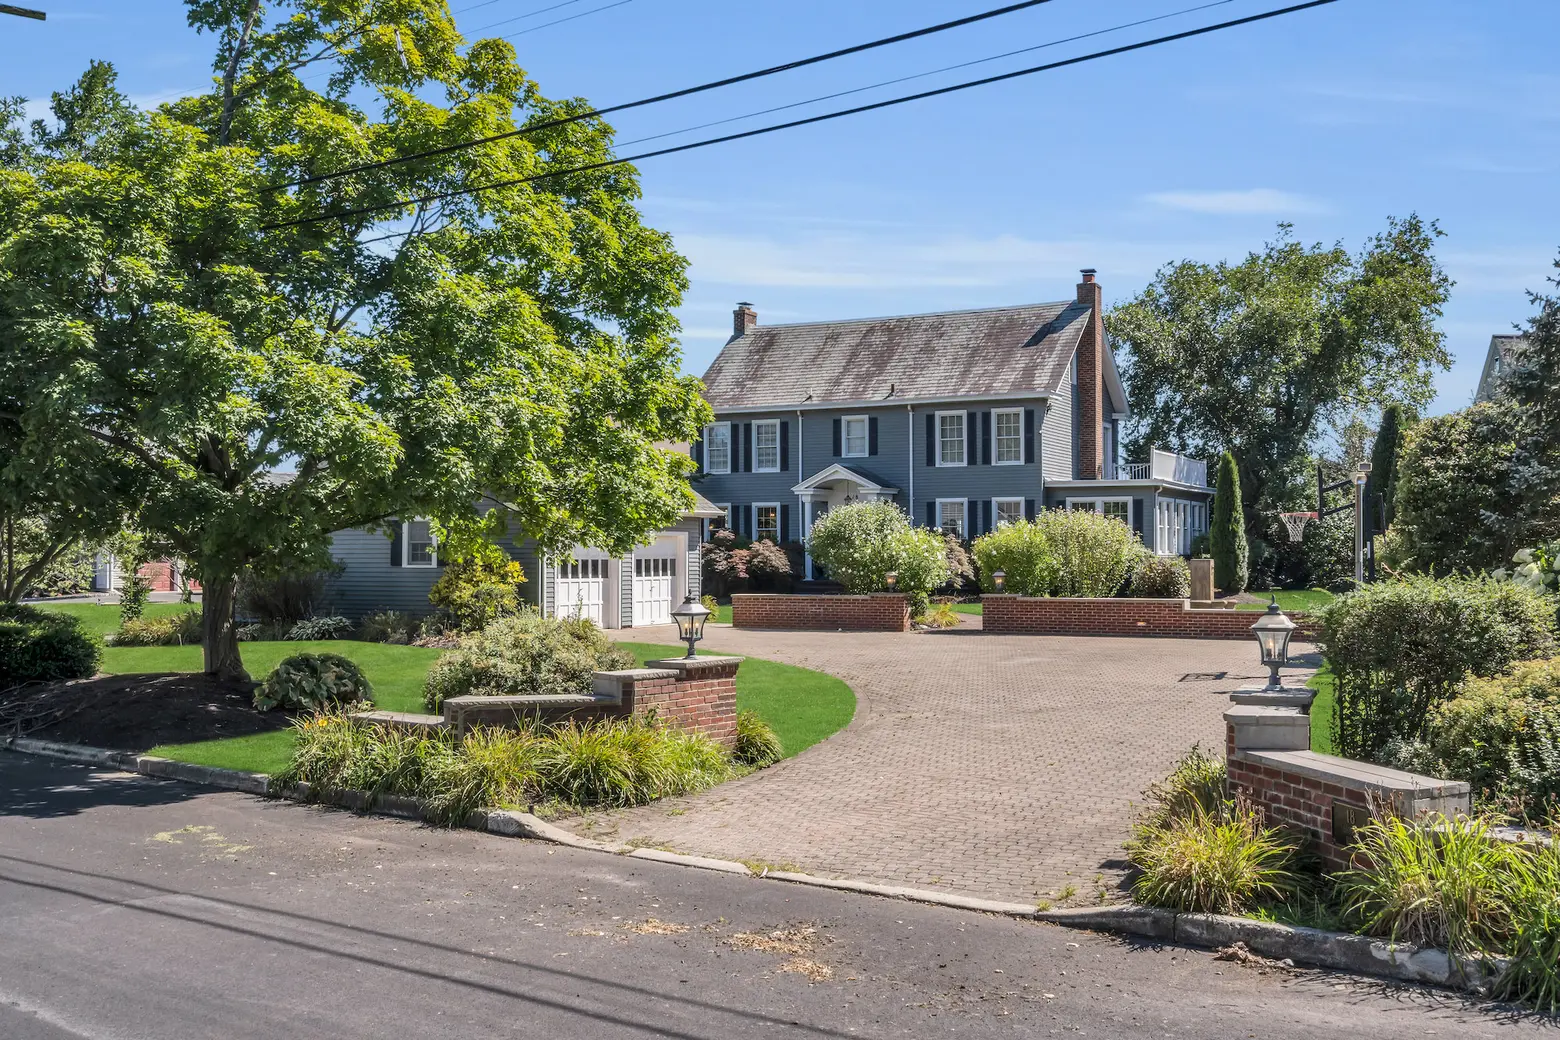 New Jersey home seen in 'The Amityville Horror' sells for $1.5M